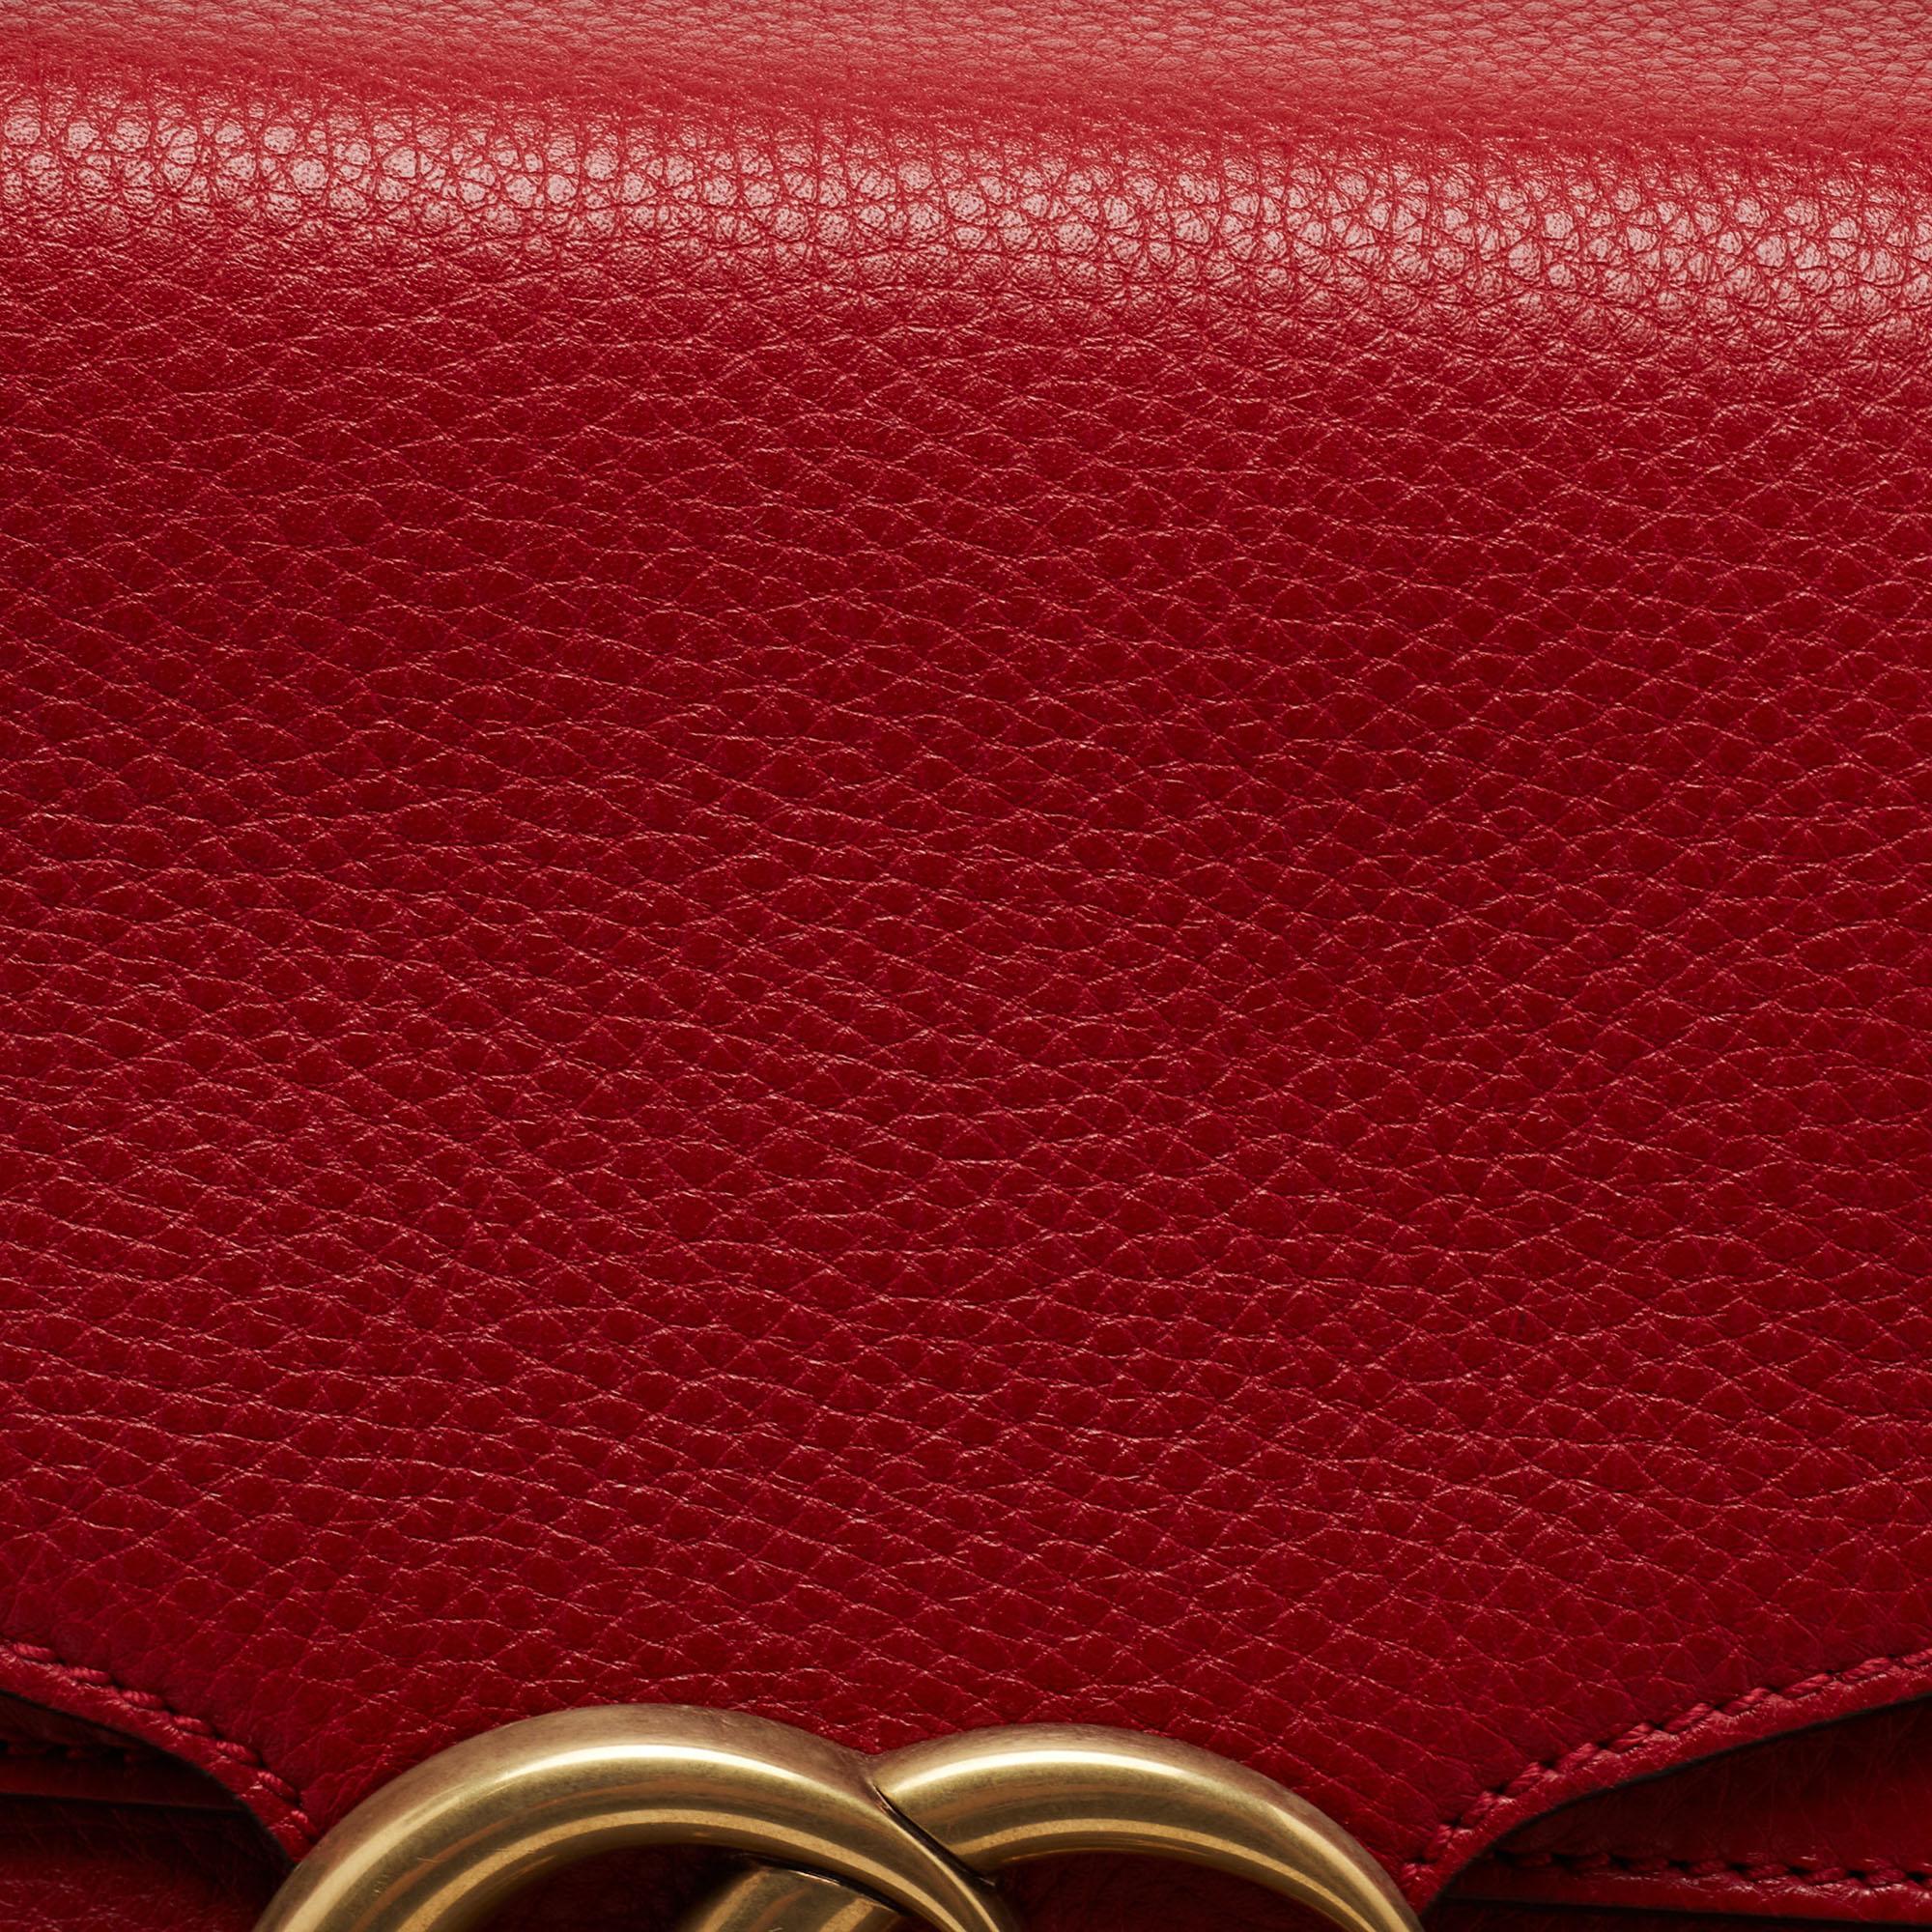 Gucci Red Leather GG Marmont Shoulder Bag 4